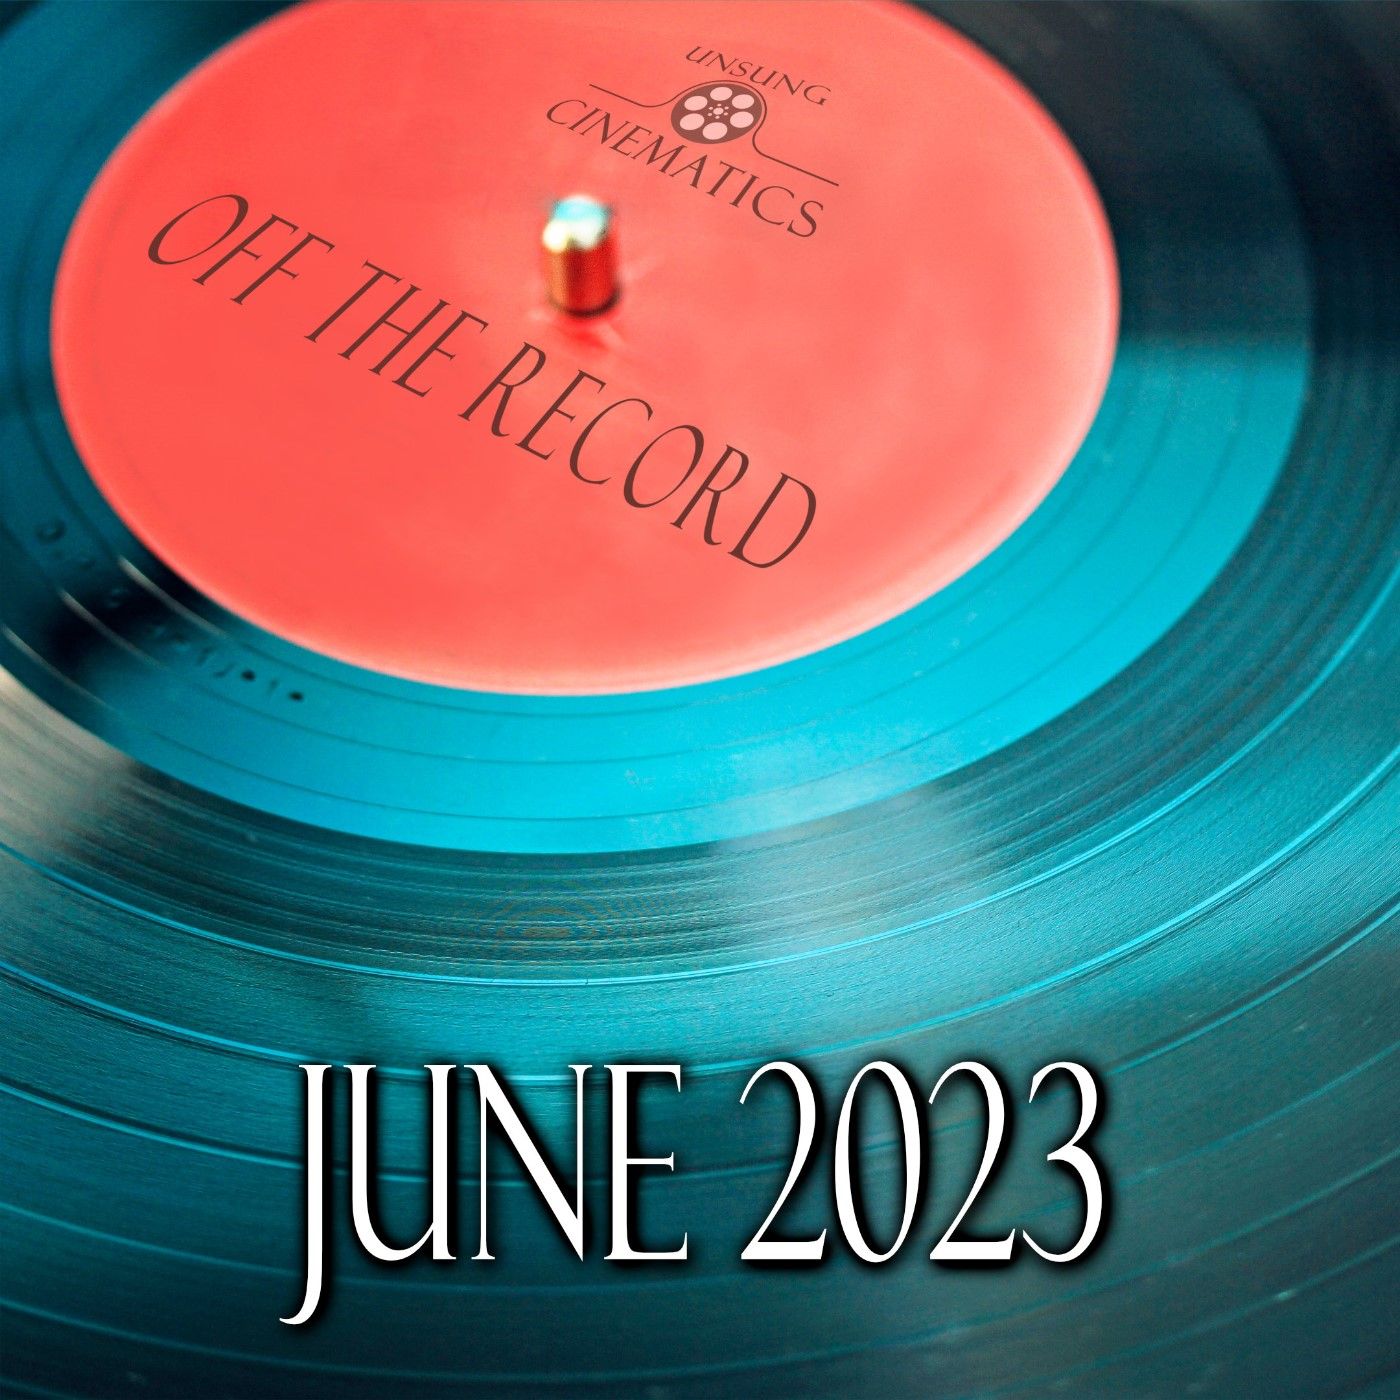 Off The Record (June 2023)